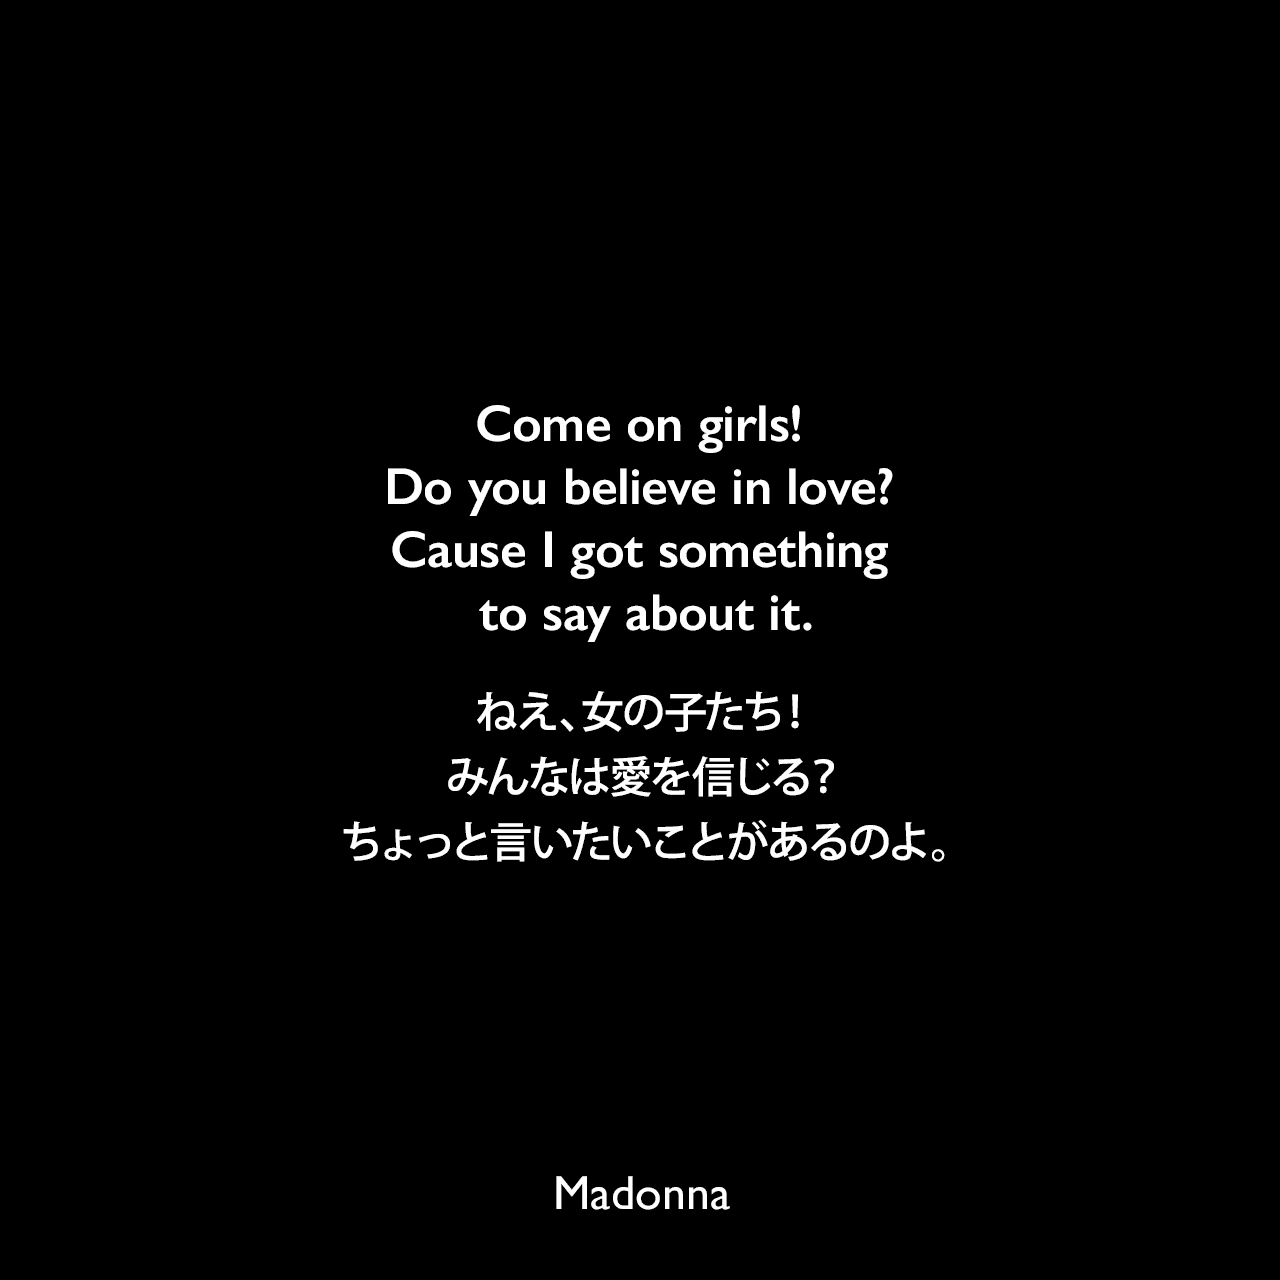 Come on girls! Do you believe in love? Cause I got something to say about it.ねえ、女の子たち！みんなは愛を信じる？ちょっと言いたいことがあるのよ。- マドンナの曲「Express Yourself」の歌詞よりMadonna